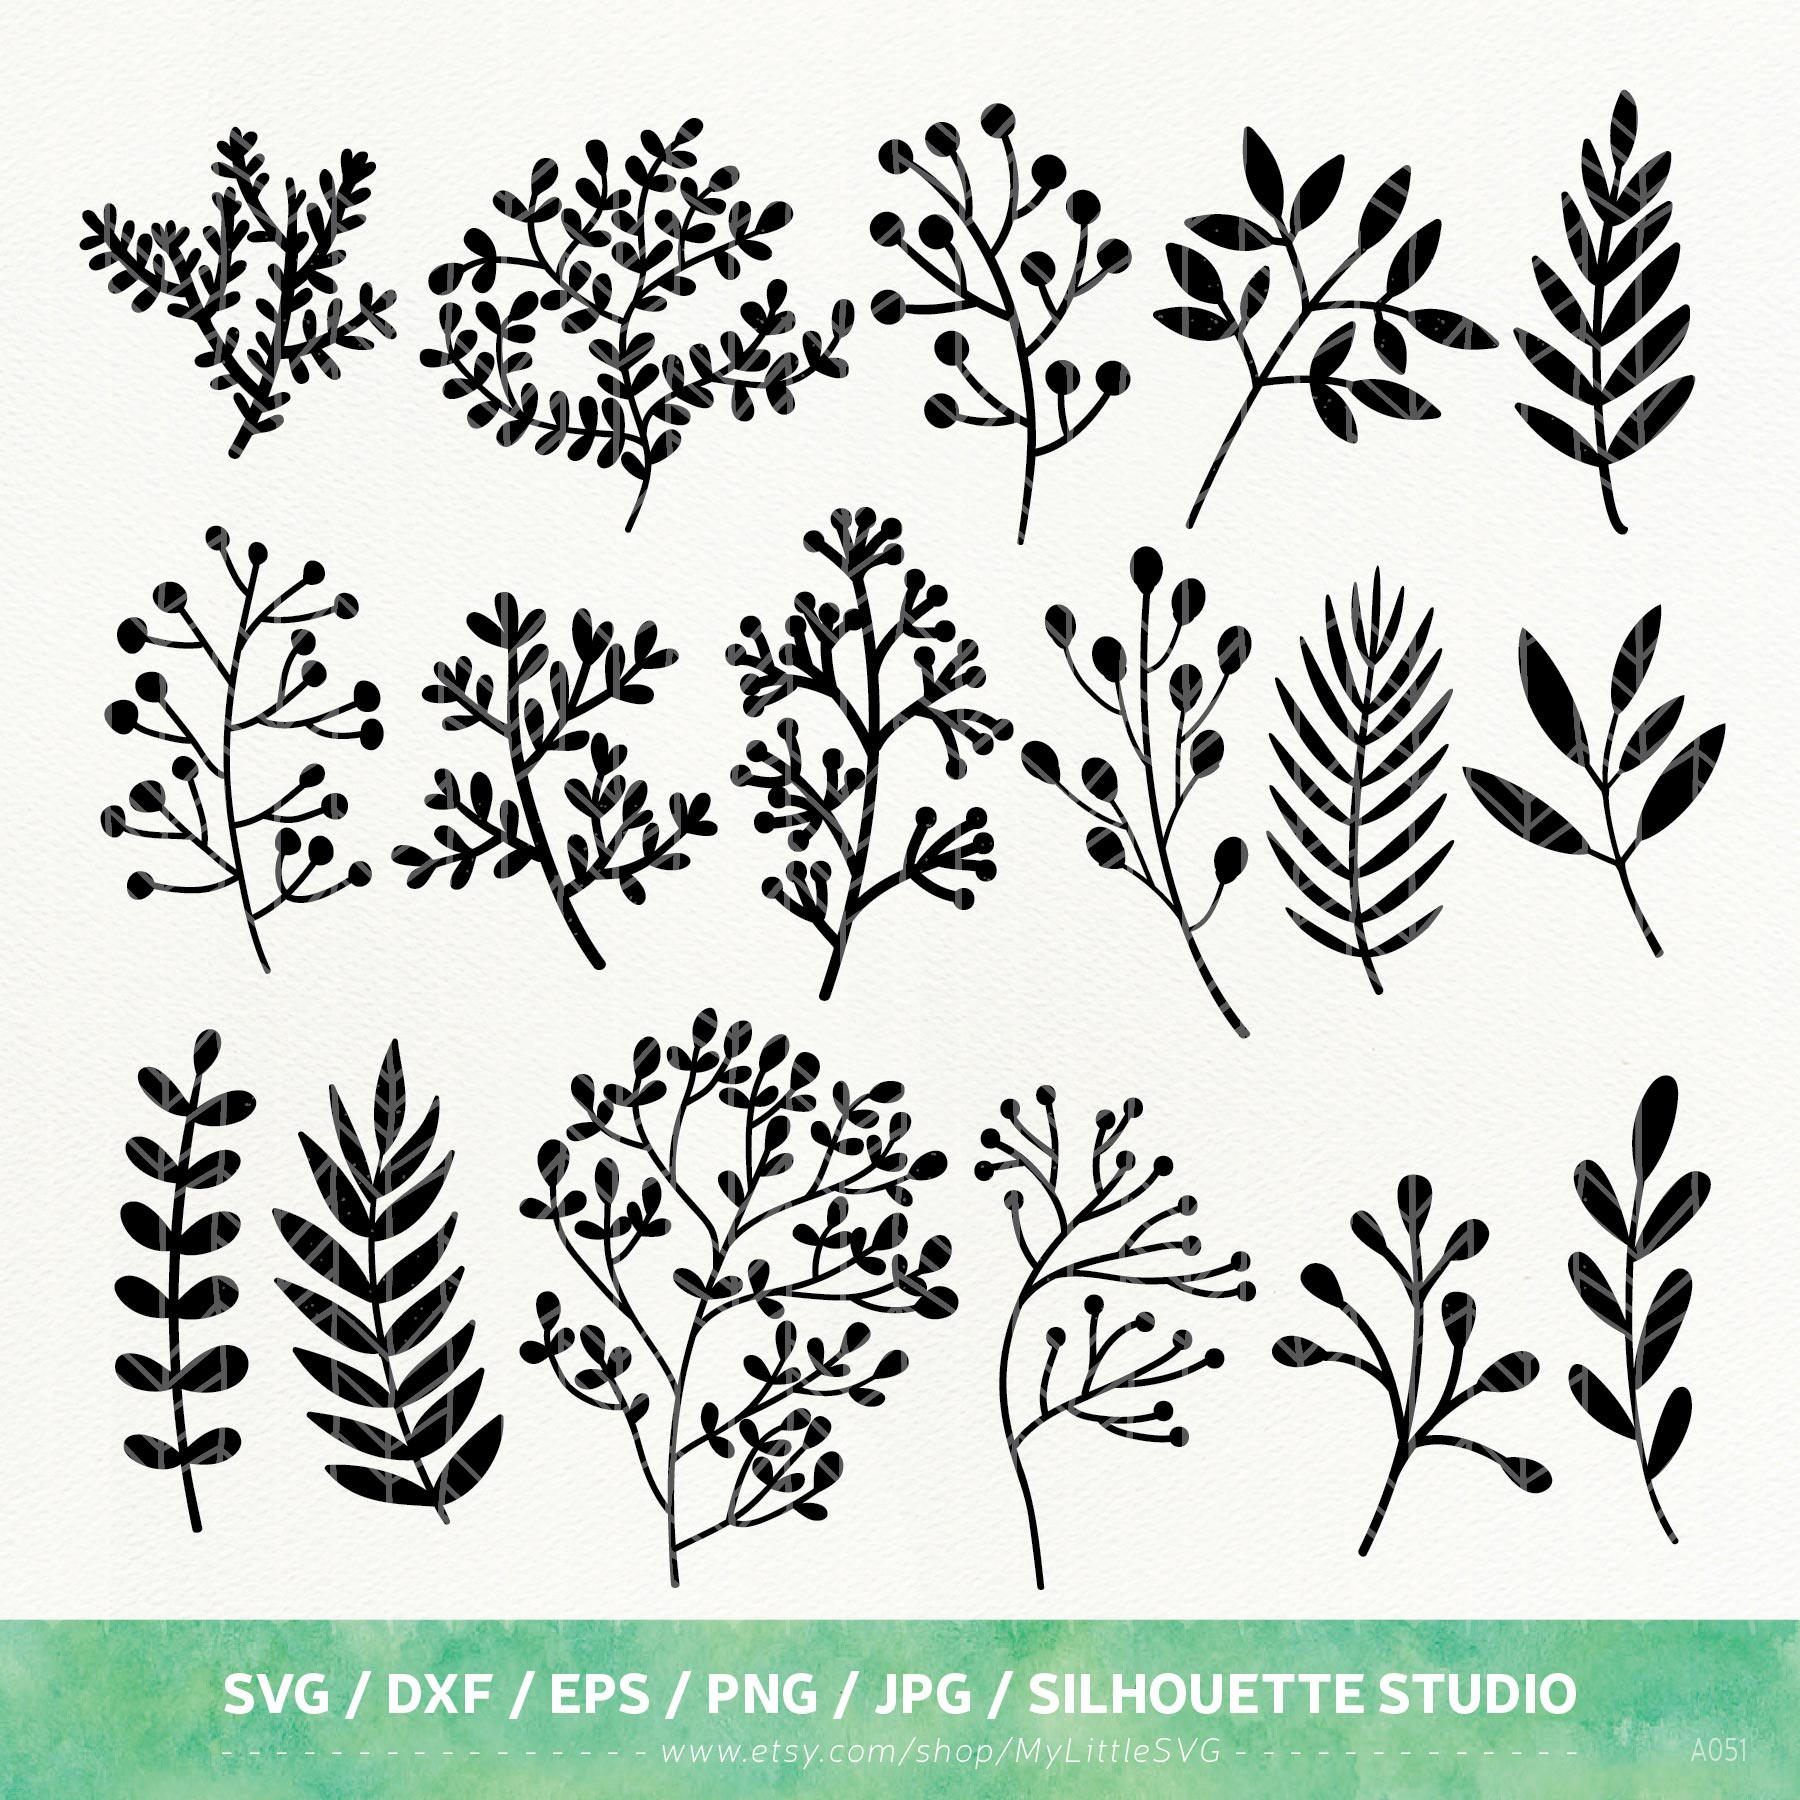 Download Leaves SVG Files Foliage dxf png eps Silhouette Studio | Etsy